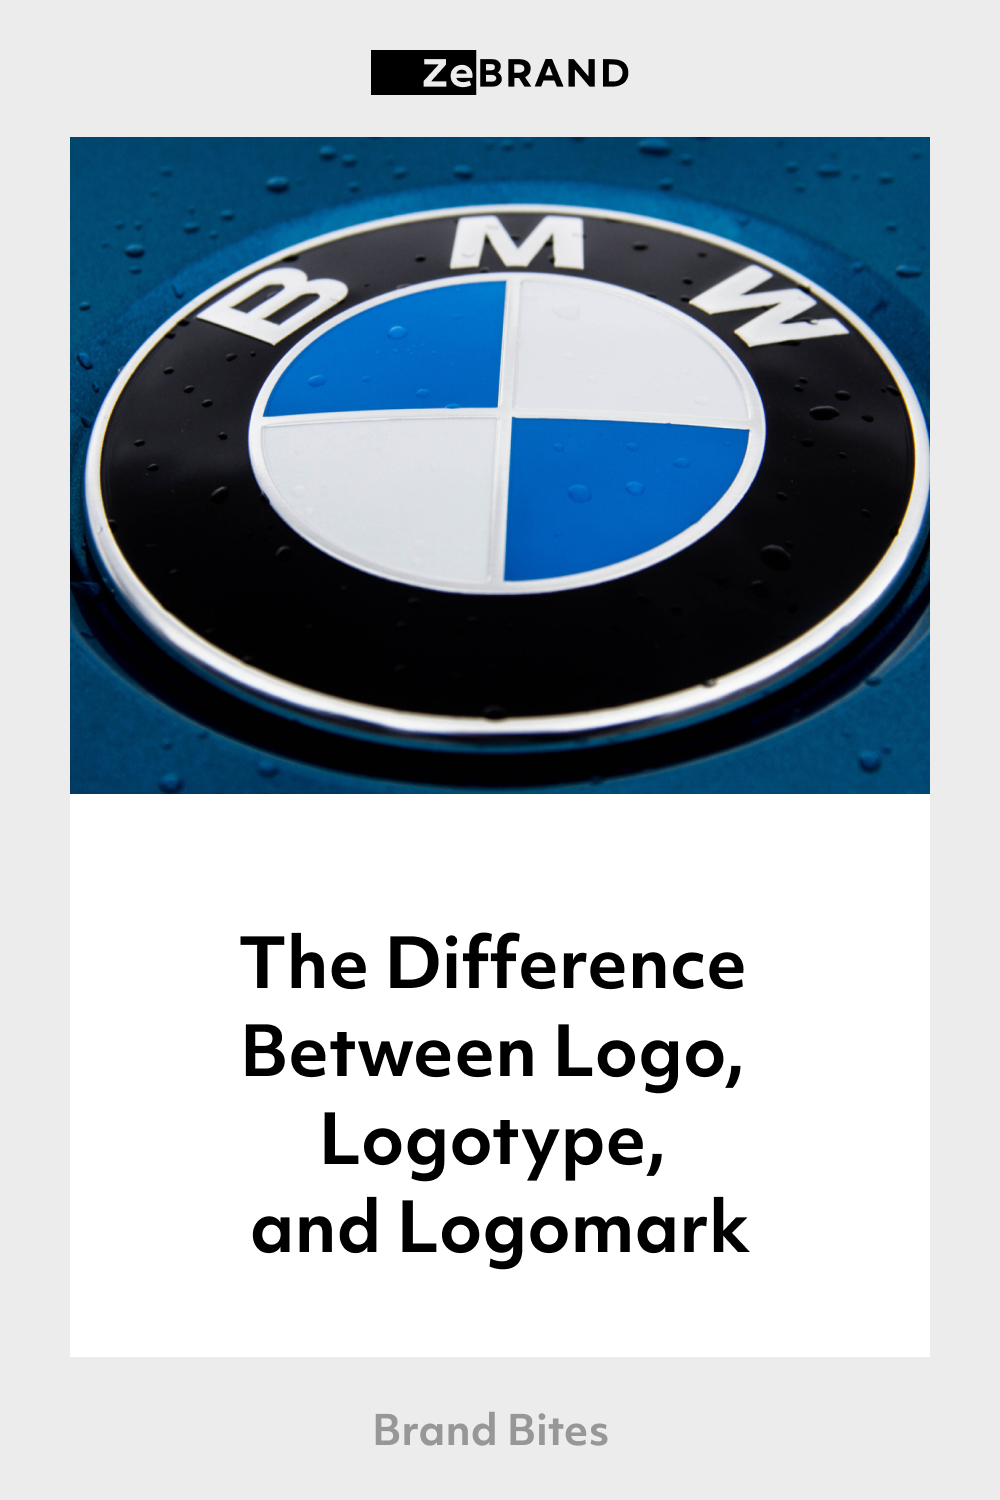 BMW logo with a luxurious feel